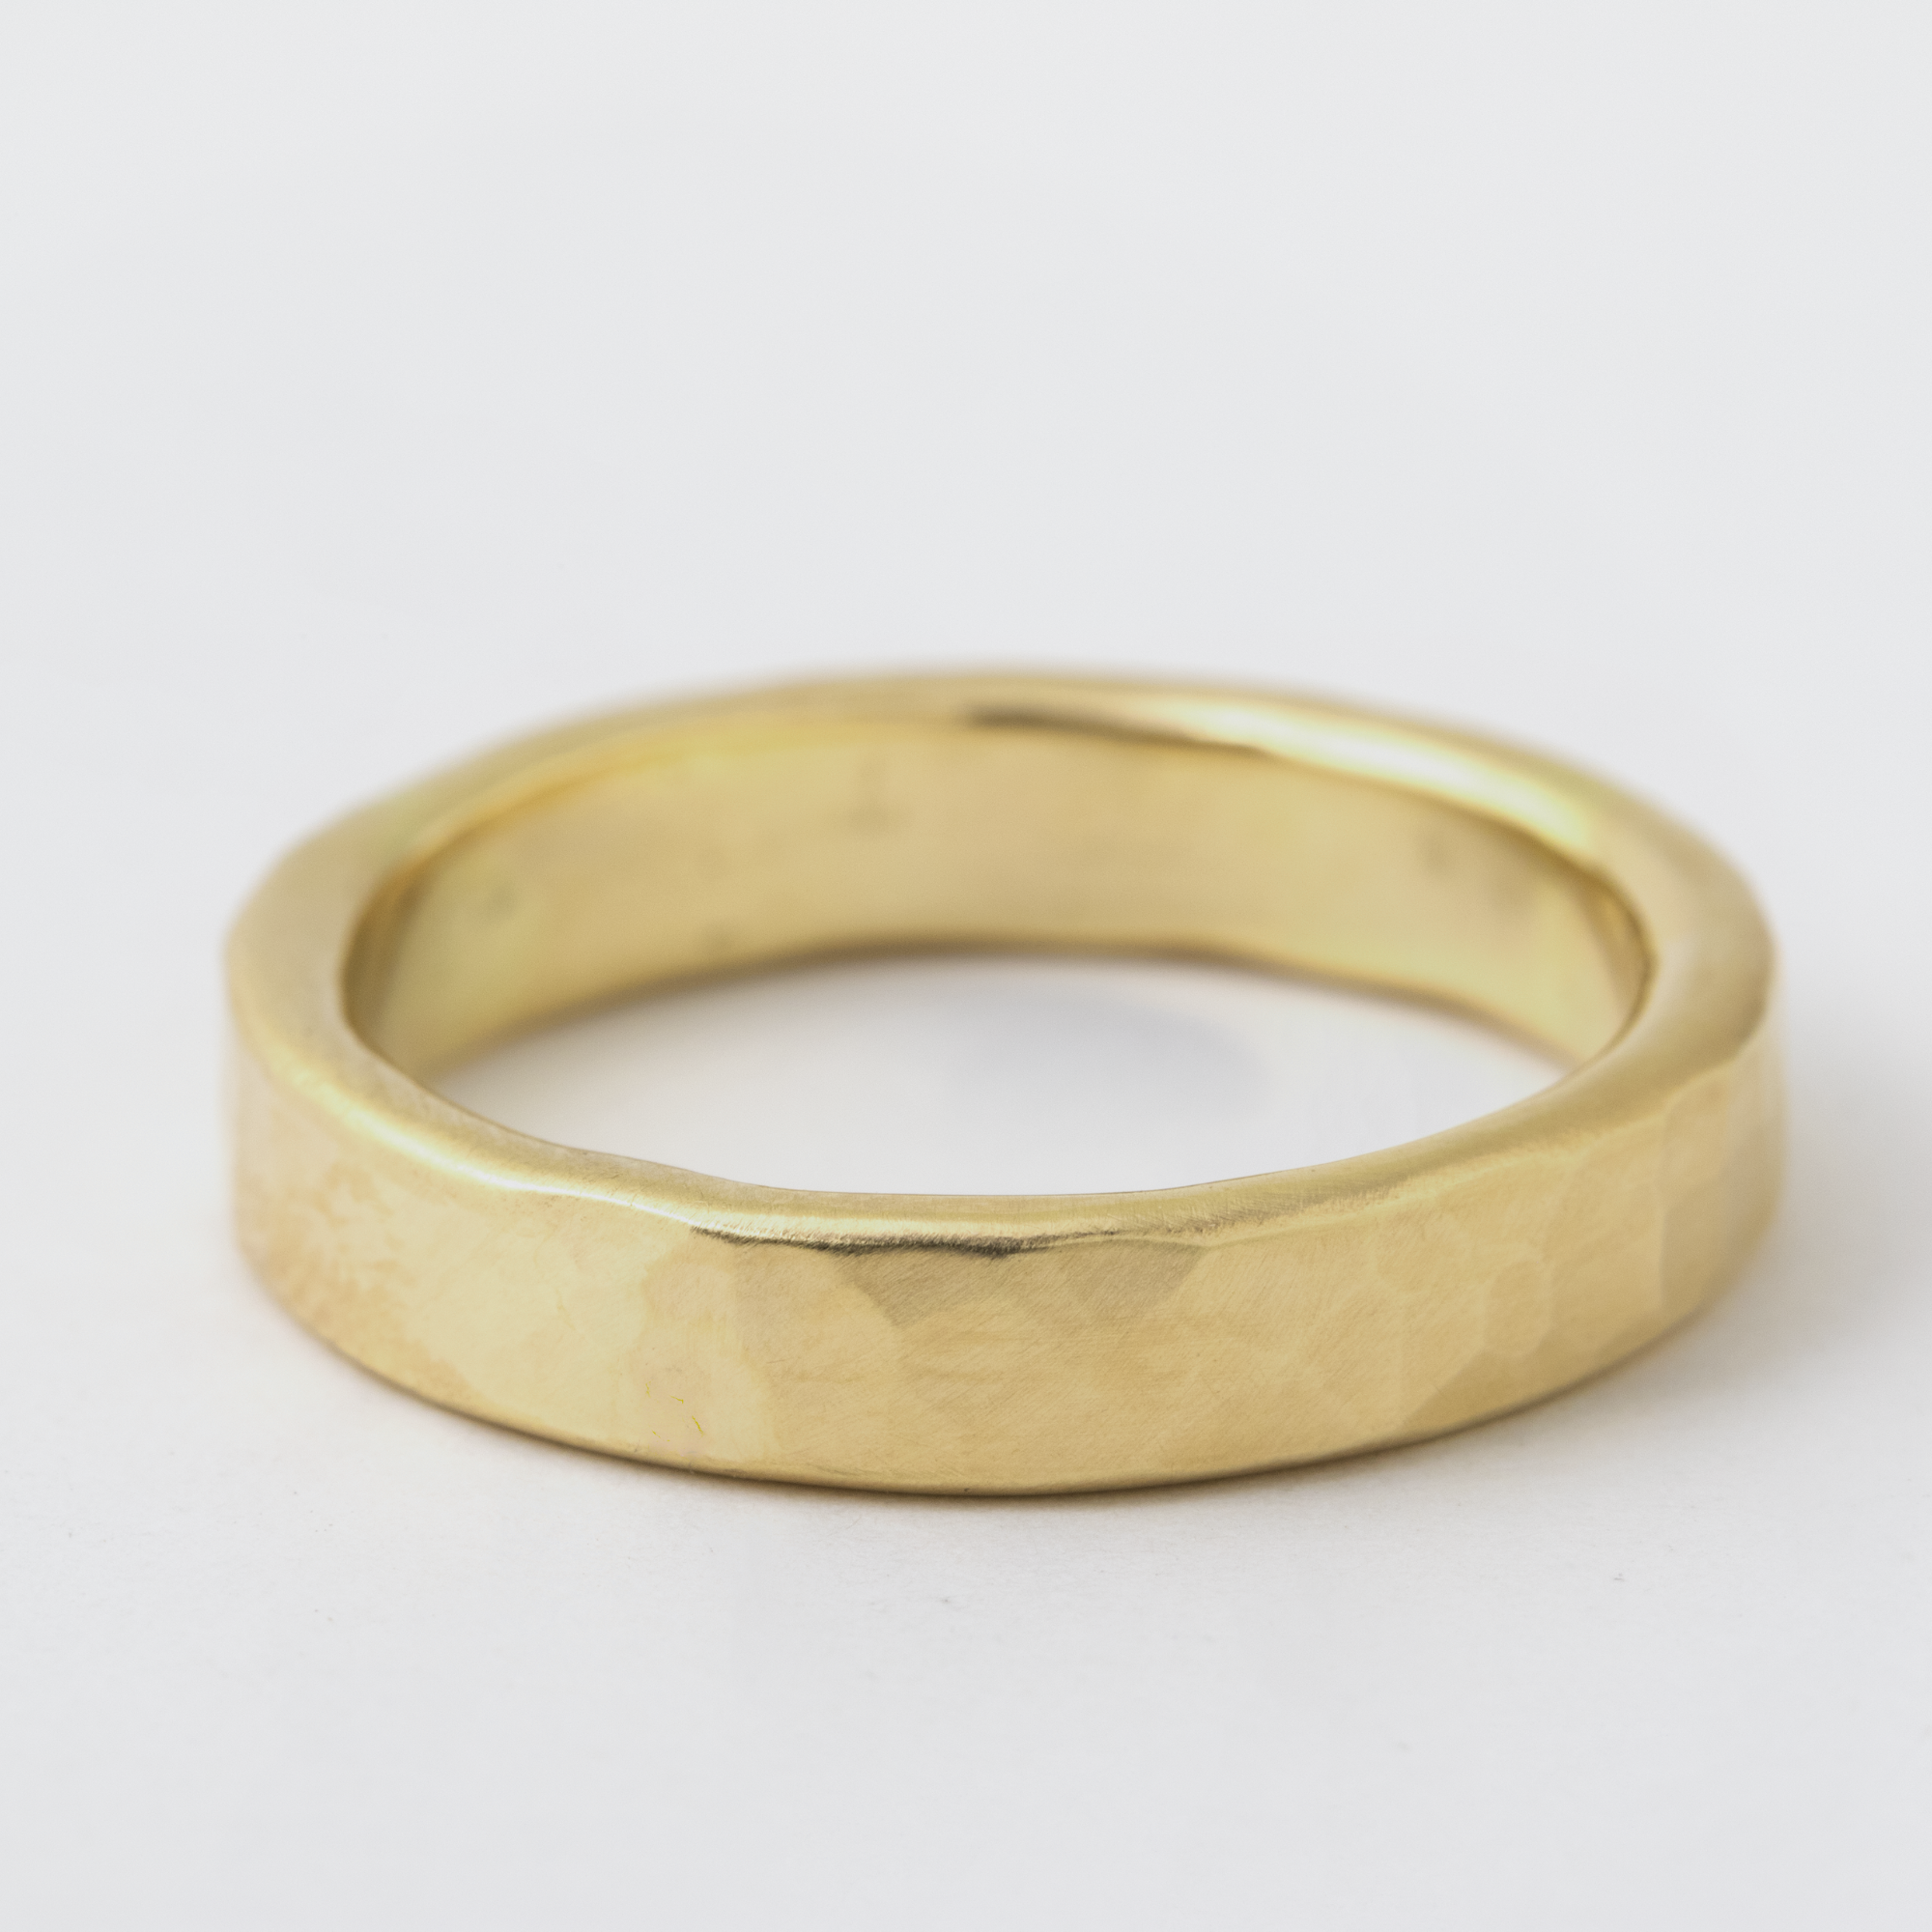 4mm Thick Hammered Solid Band - Yellow Gold - Melissa Joy Manning Jewelry